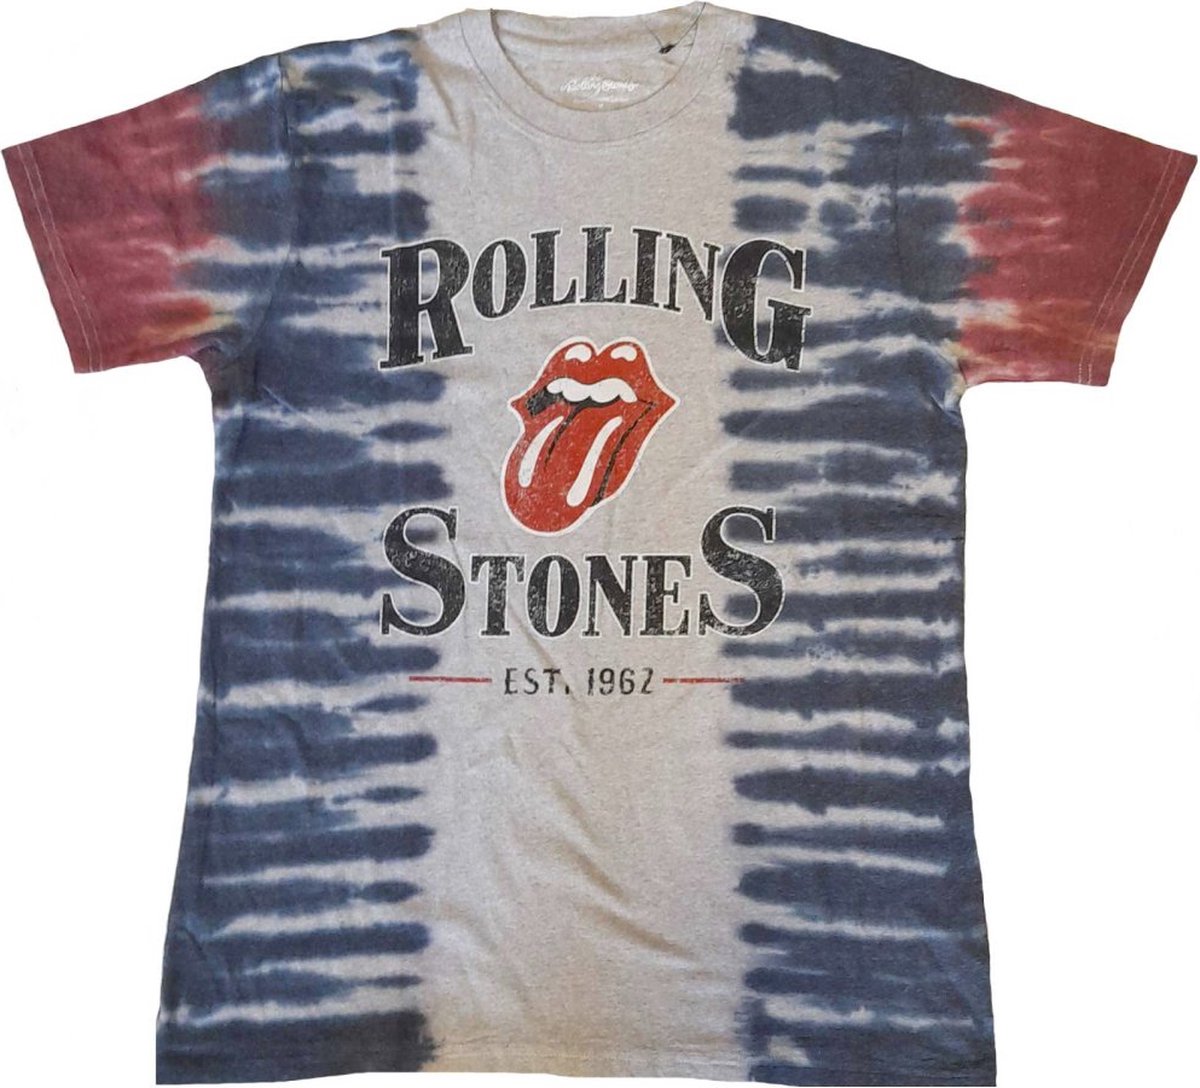 The Rolling Stones - Satisfaction Heren T-shirt - XL - Multicolours